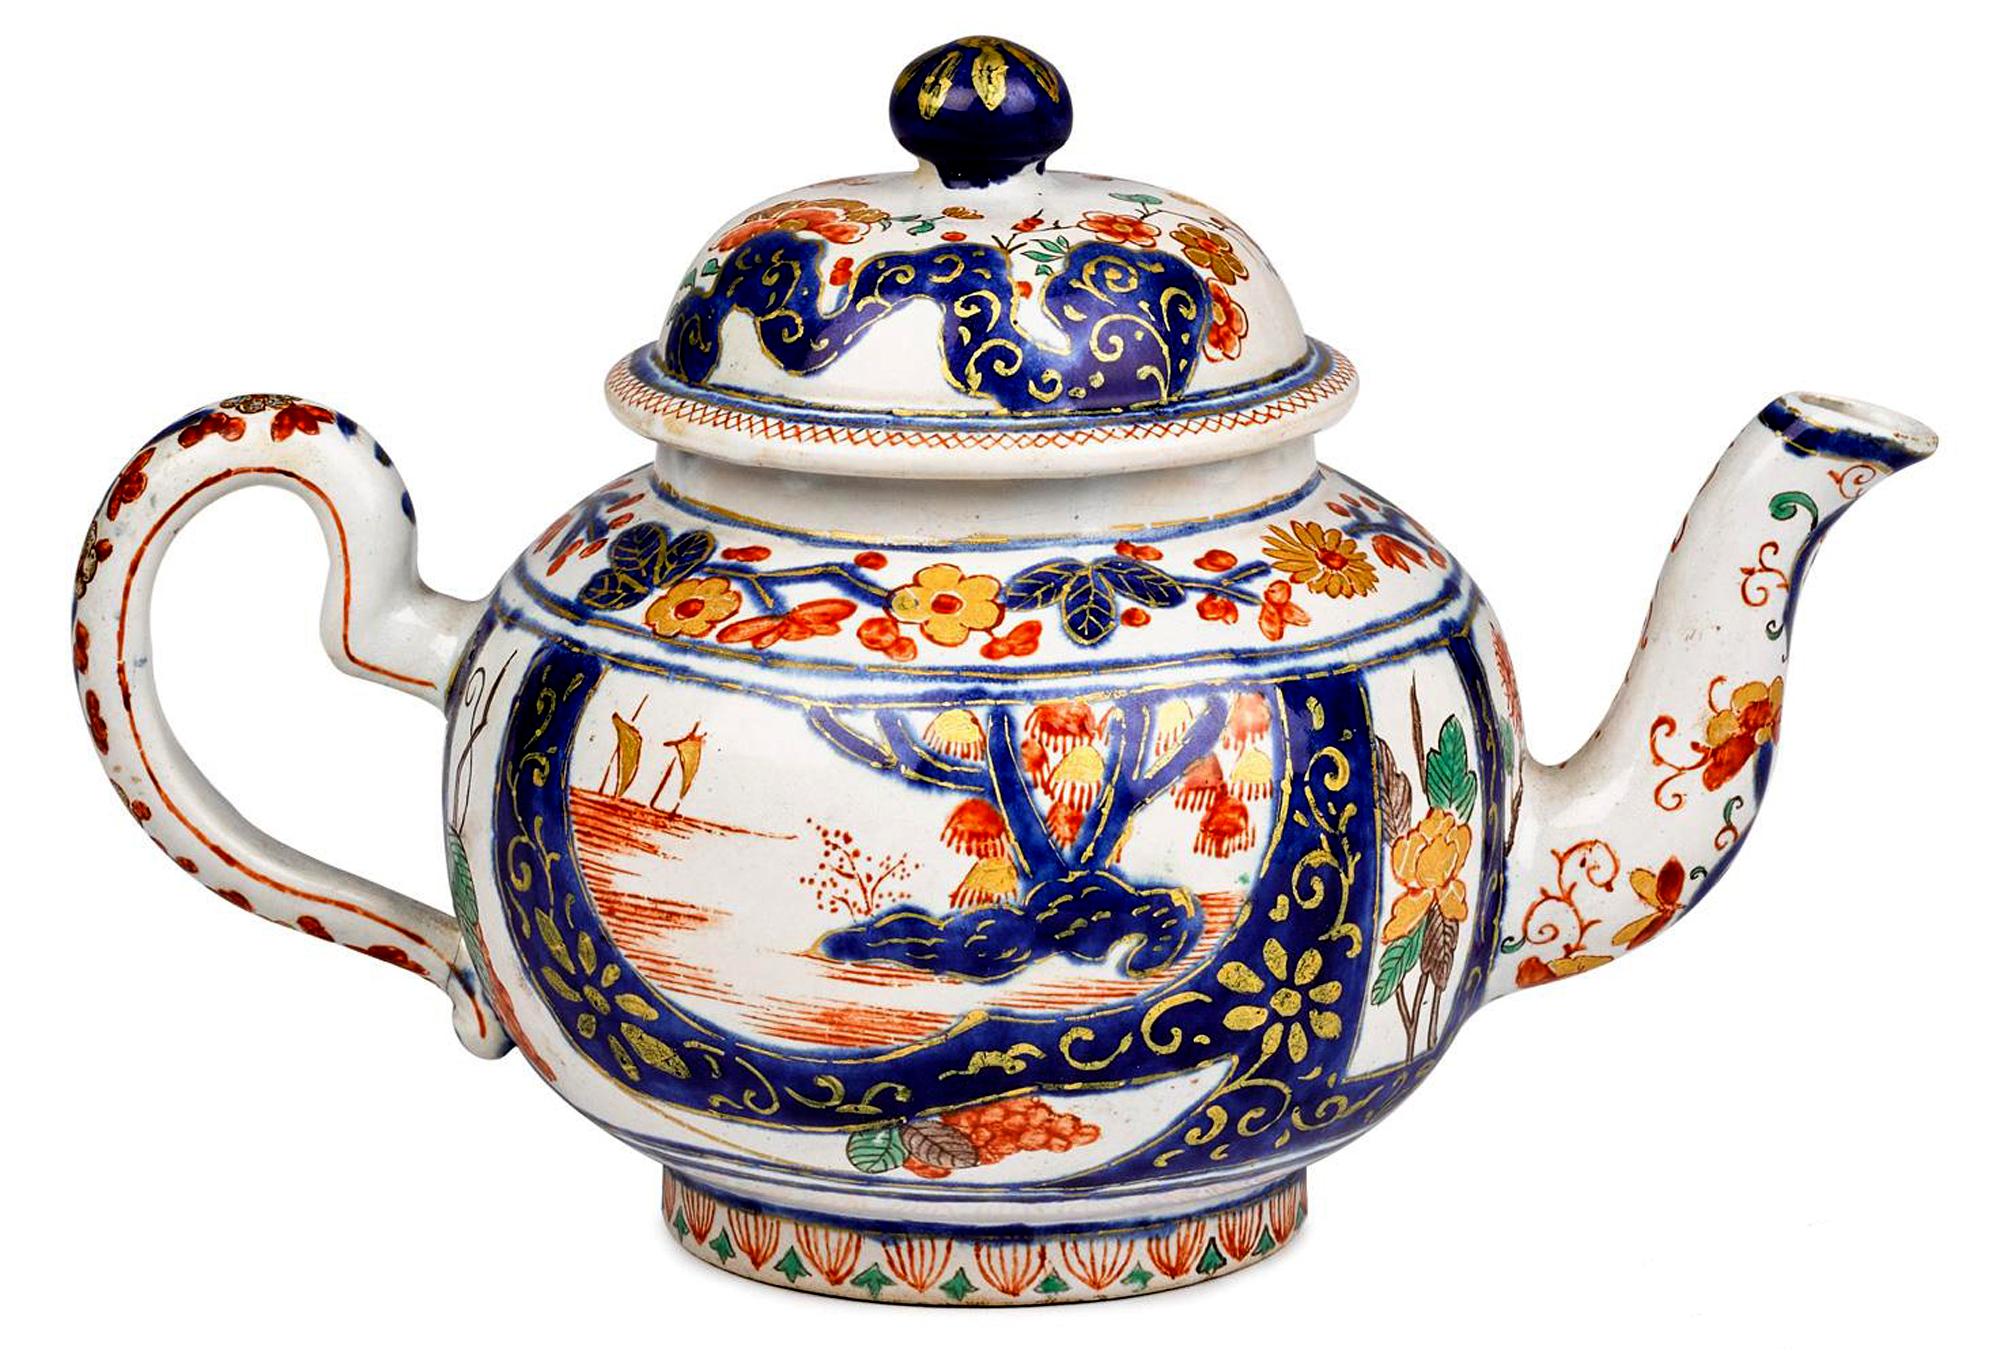 Dutch Delft Dore Chinoiserie teapot & cover,
Early 18th Century.

The circular Dutch Delft Dore large teapot is painted in with Chinoiserie scenes within shaped panels bordered with a dark blue and highlighted with gilt flower heads and leaves.